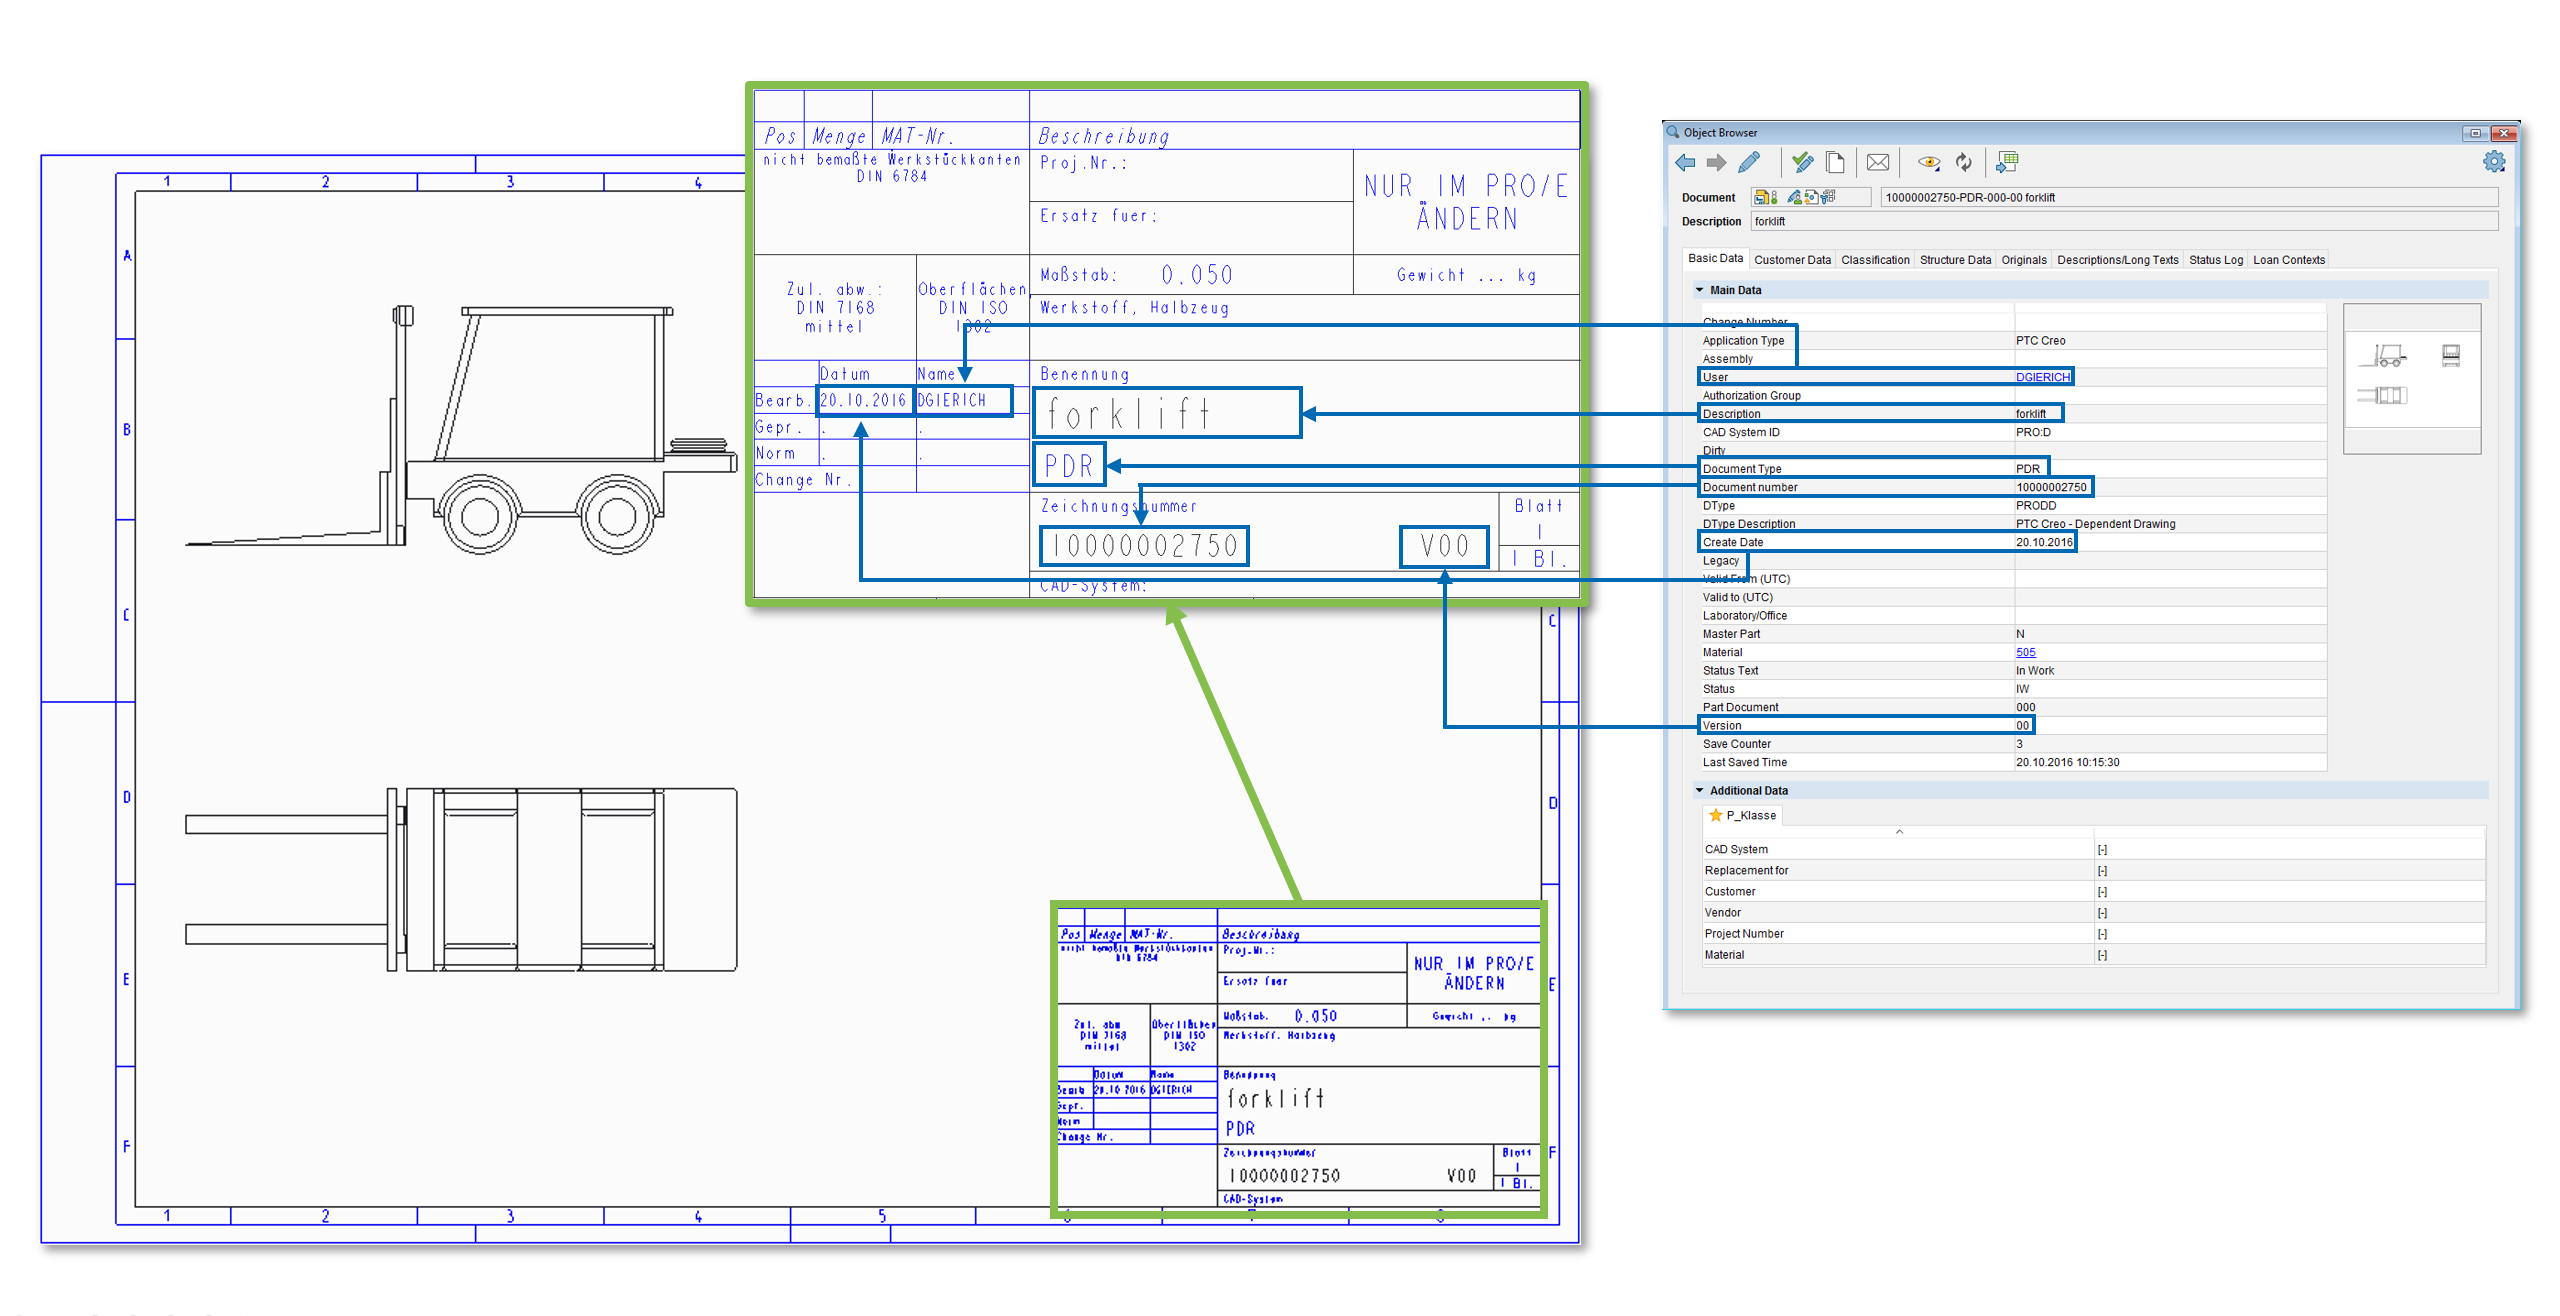 Screenshot of the synchronization of SAP information into the PTC Creo Parametric title block